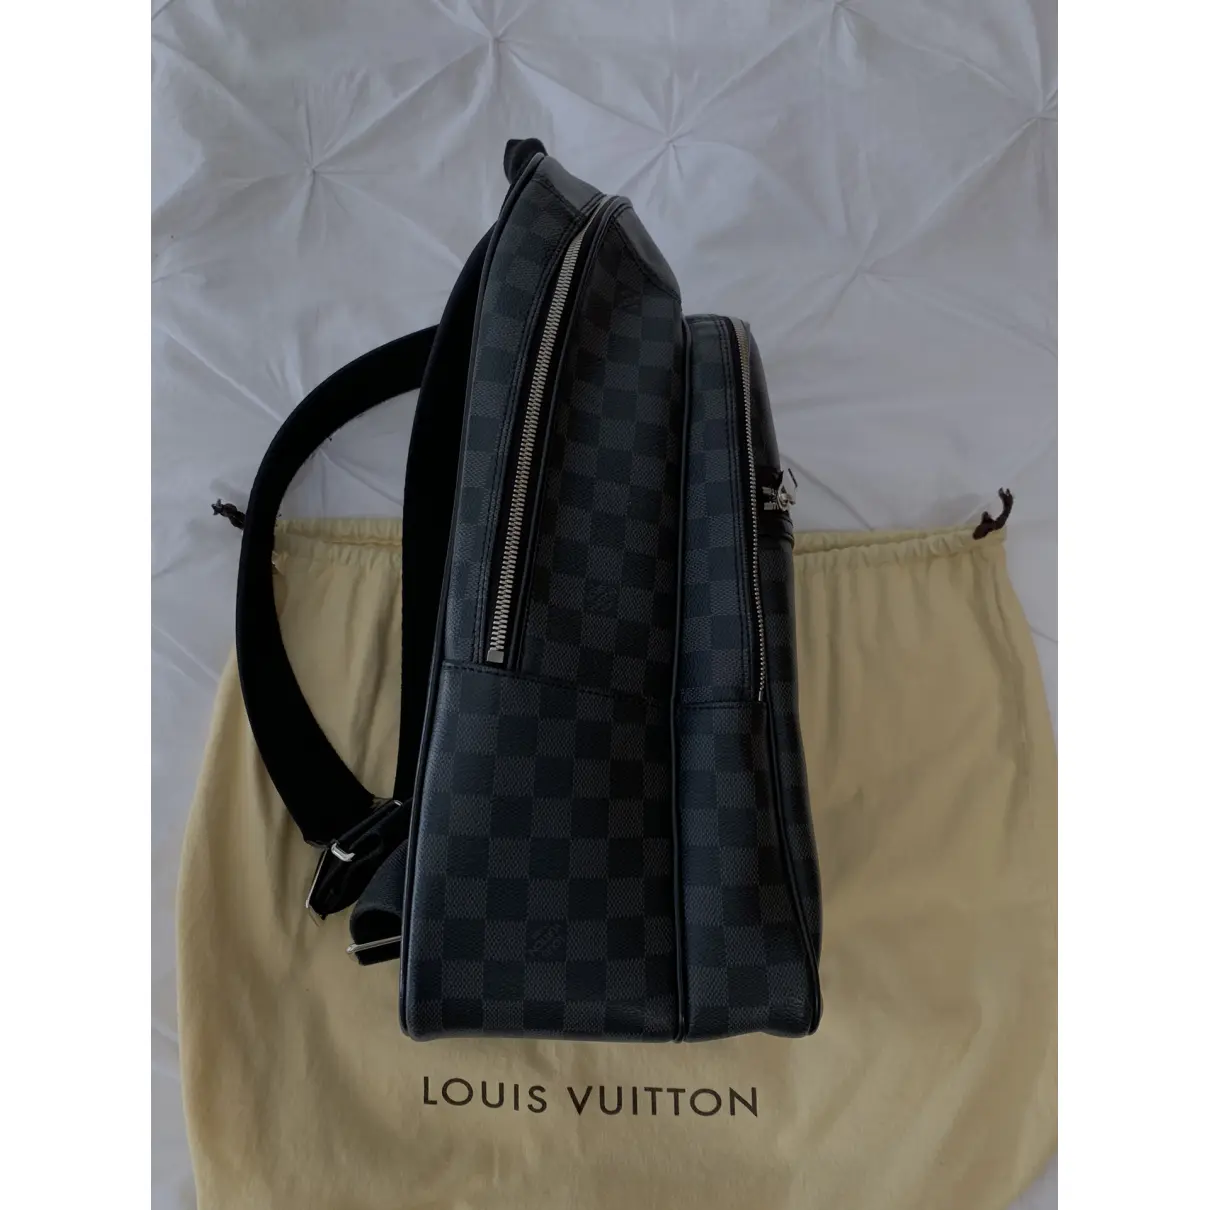 Michael Backpack leather bag Louis Vuitton